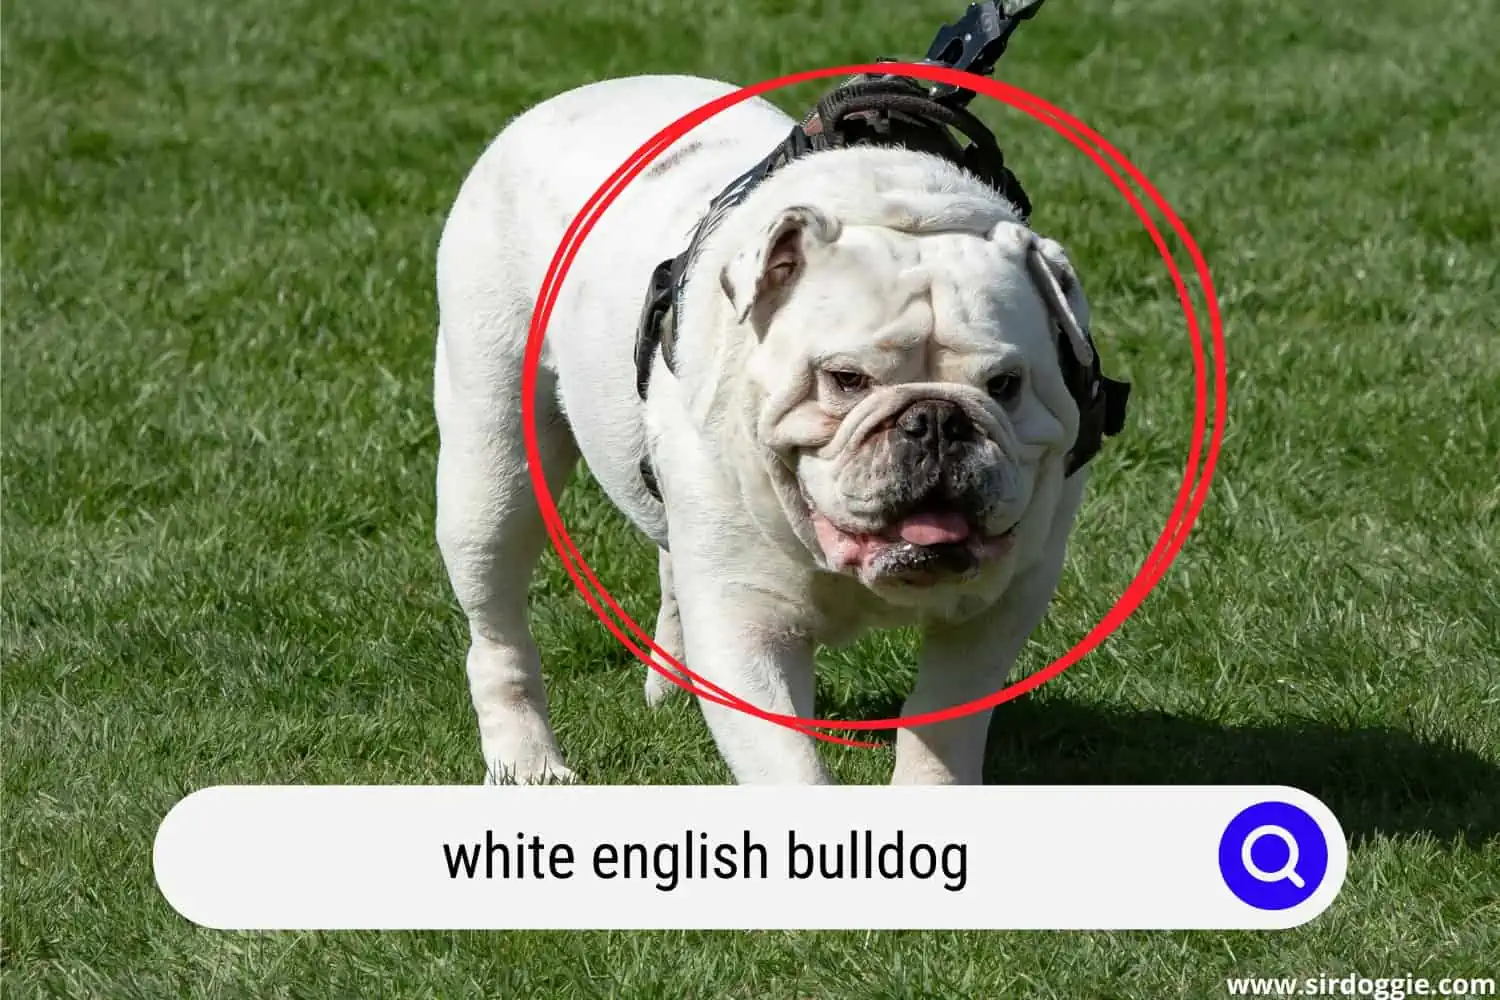 White English Bulldog with harness walking in the green grassy field